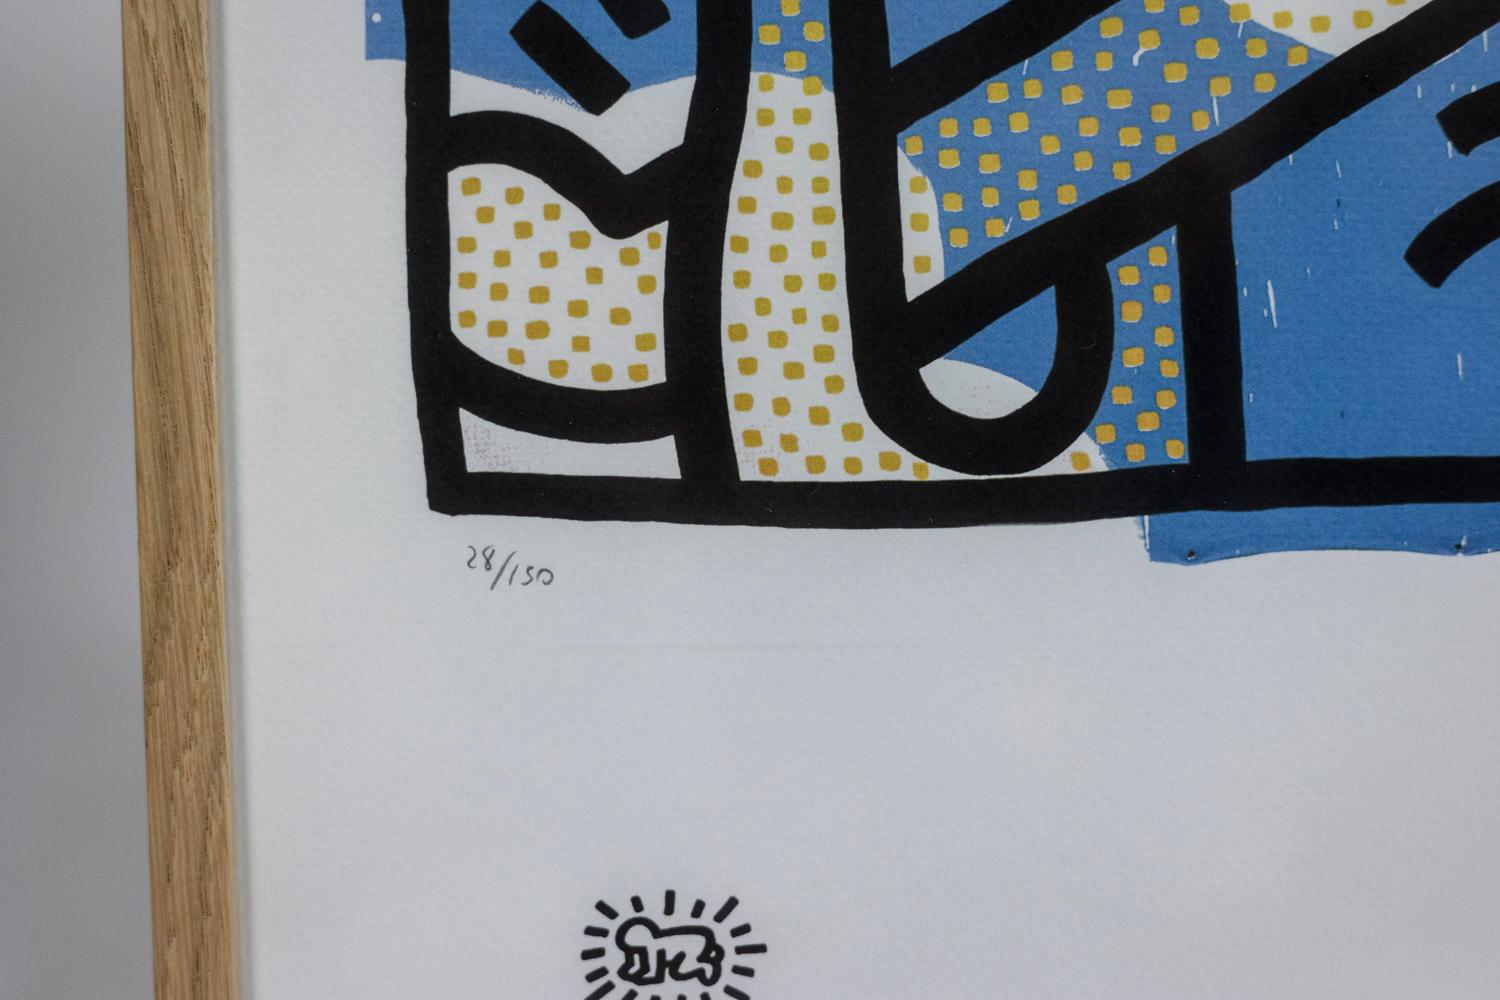 Keith Haring, signed and numbered.

Abstract silkscreen, suggesting schematic figures, in shades of blue, white, yellow and black in its blond oak frame.

Numbered 28/150.

American work realized in the 1990s.

Dimensions: W 50 x H 70 x D 2